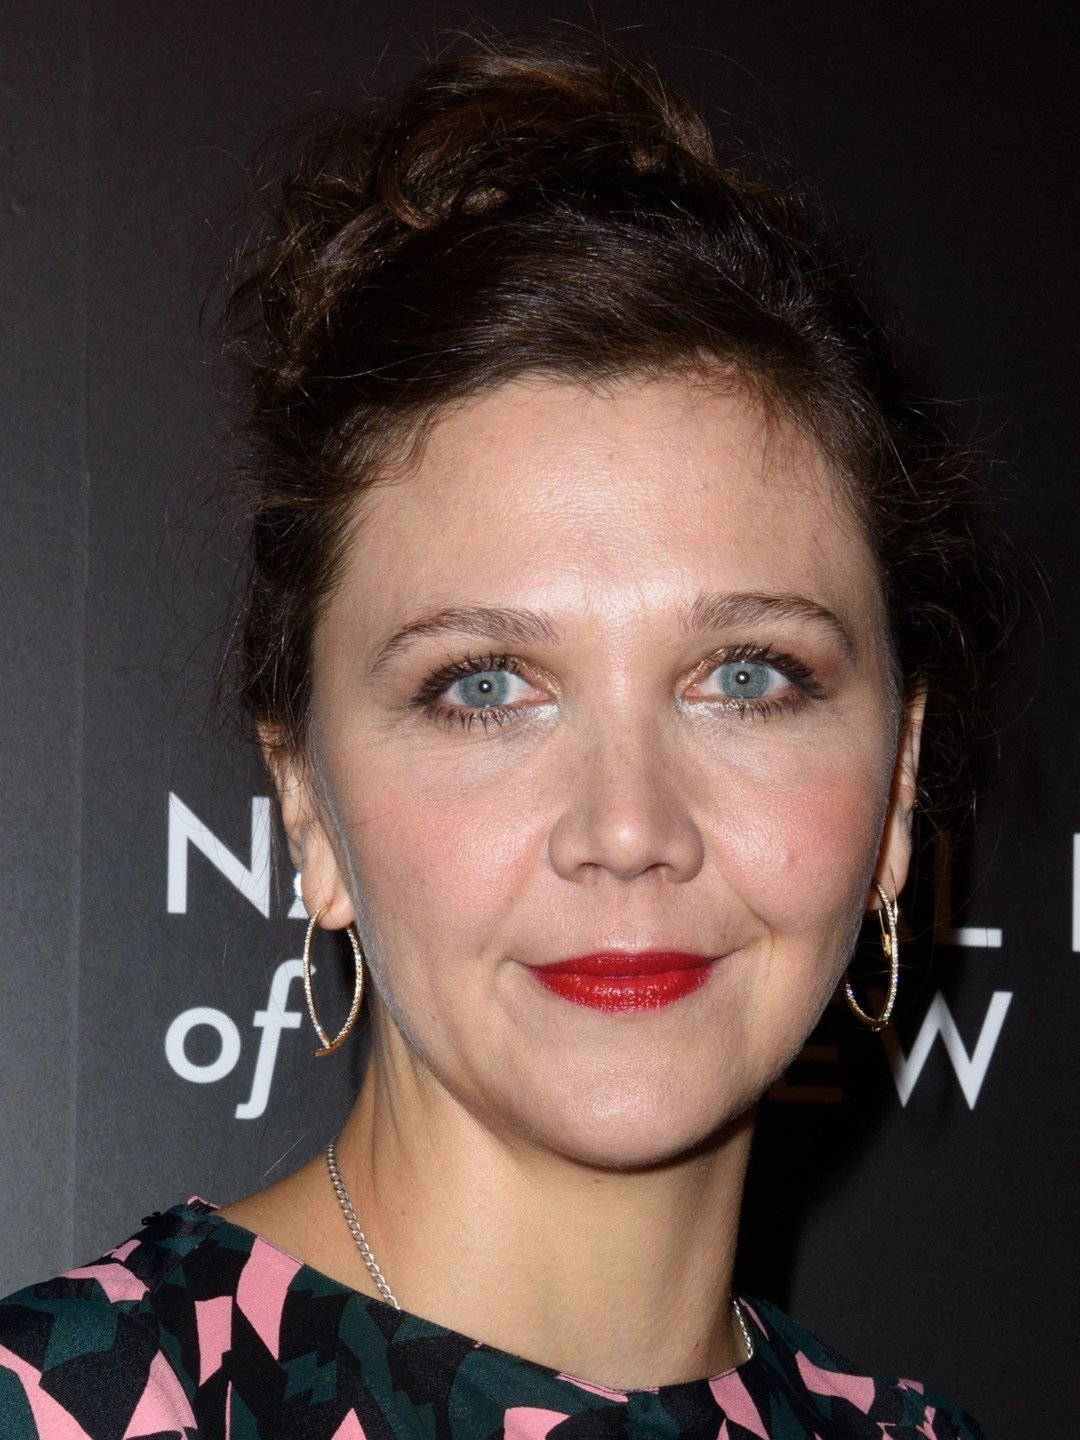 How tall is Maggie Gyllenhaal?